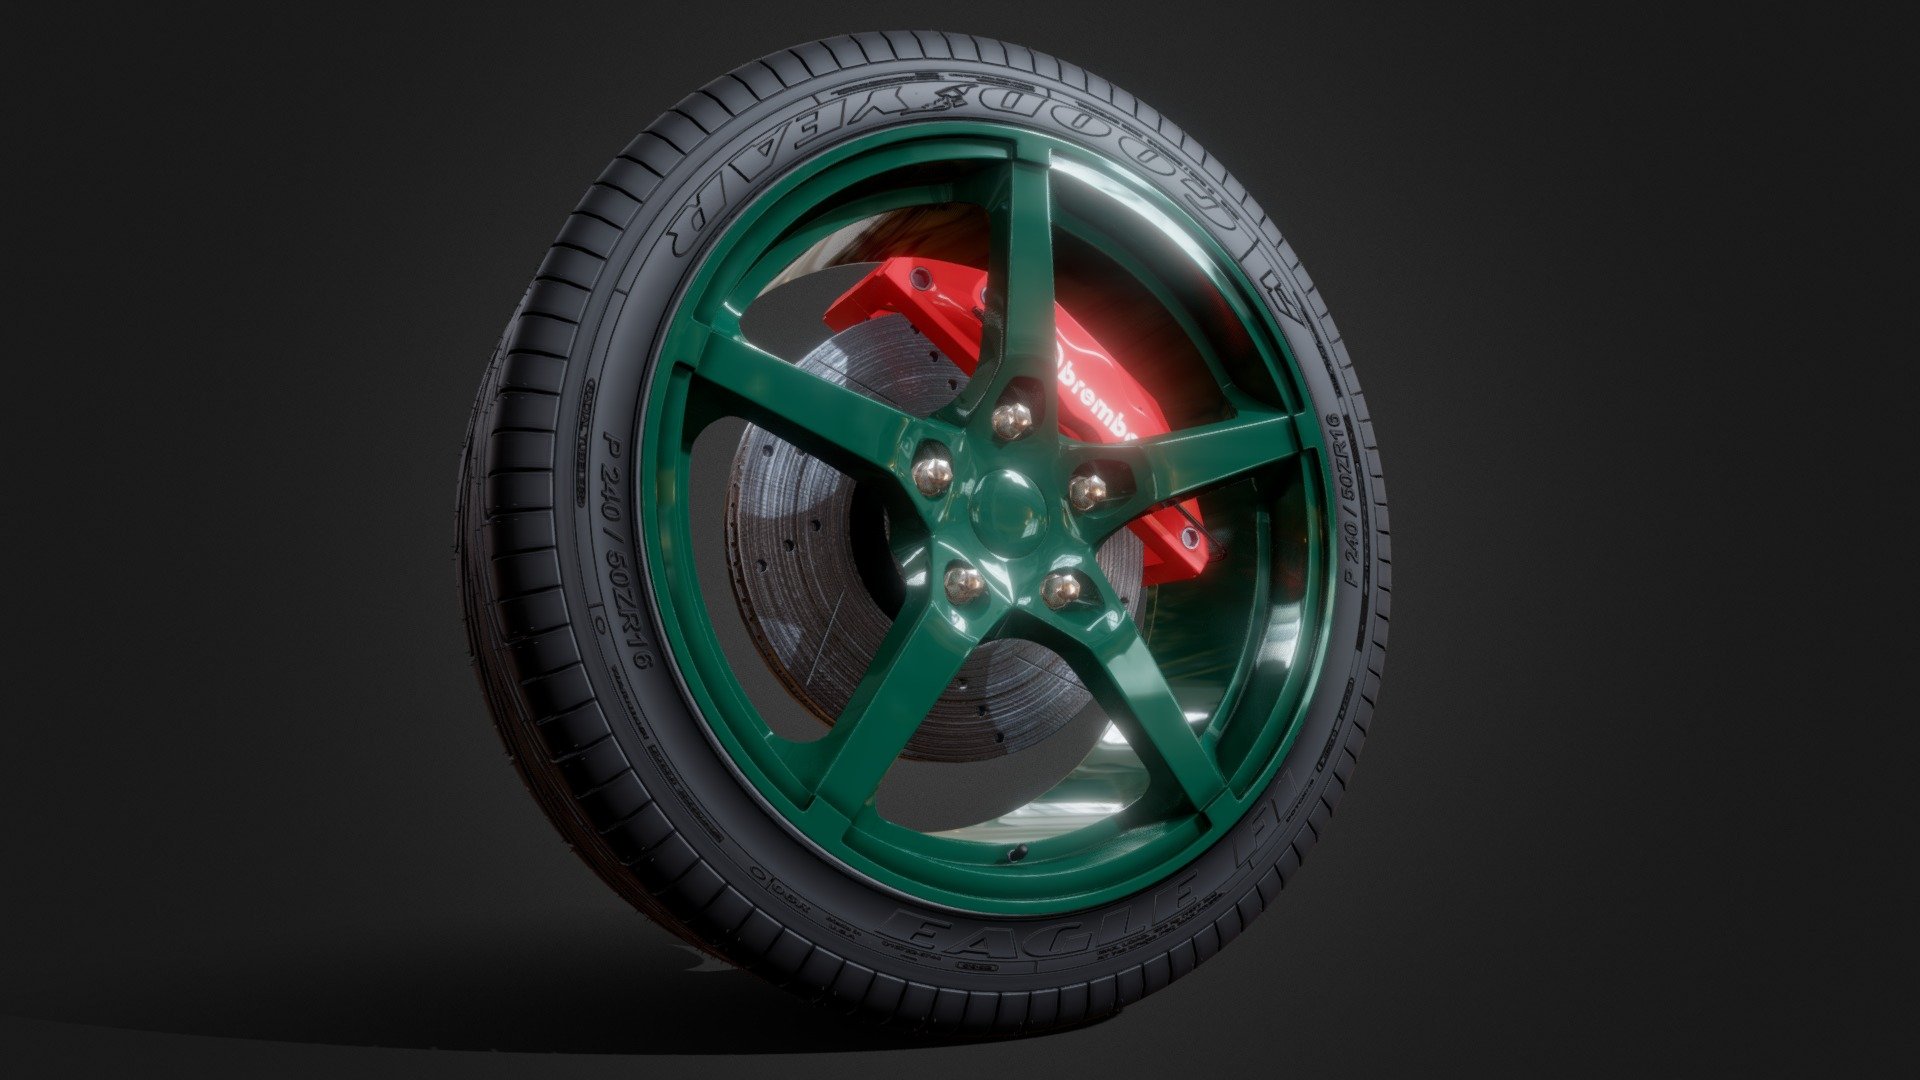 I have prepared an aluminum disc from me design for your cars. The car wheel is also ready with a Brembo brake 3d model